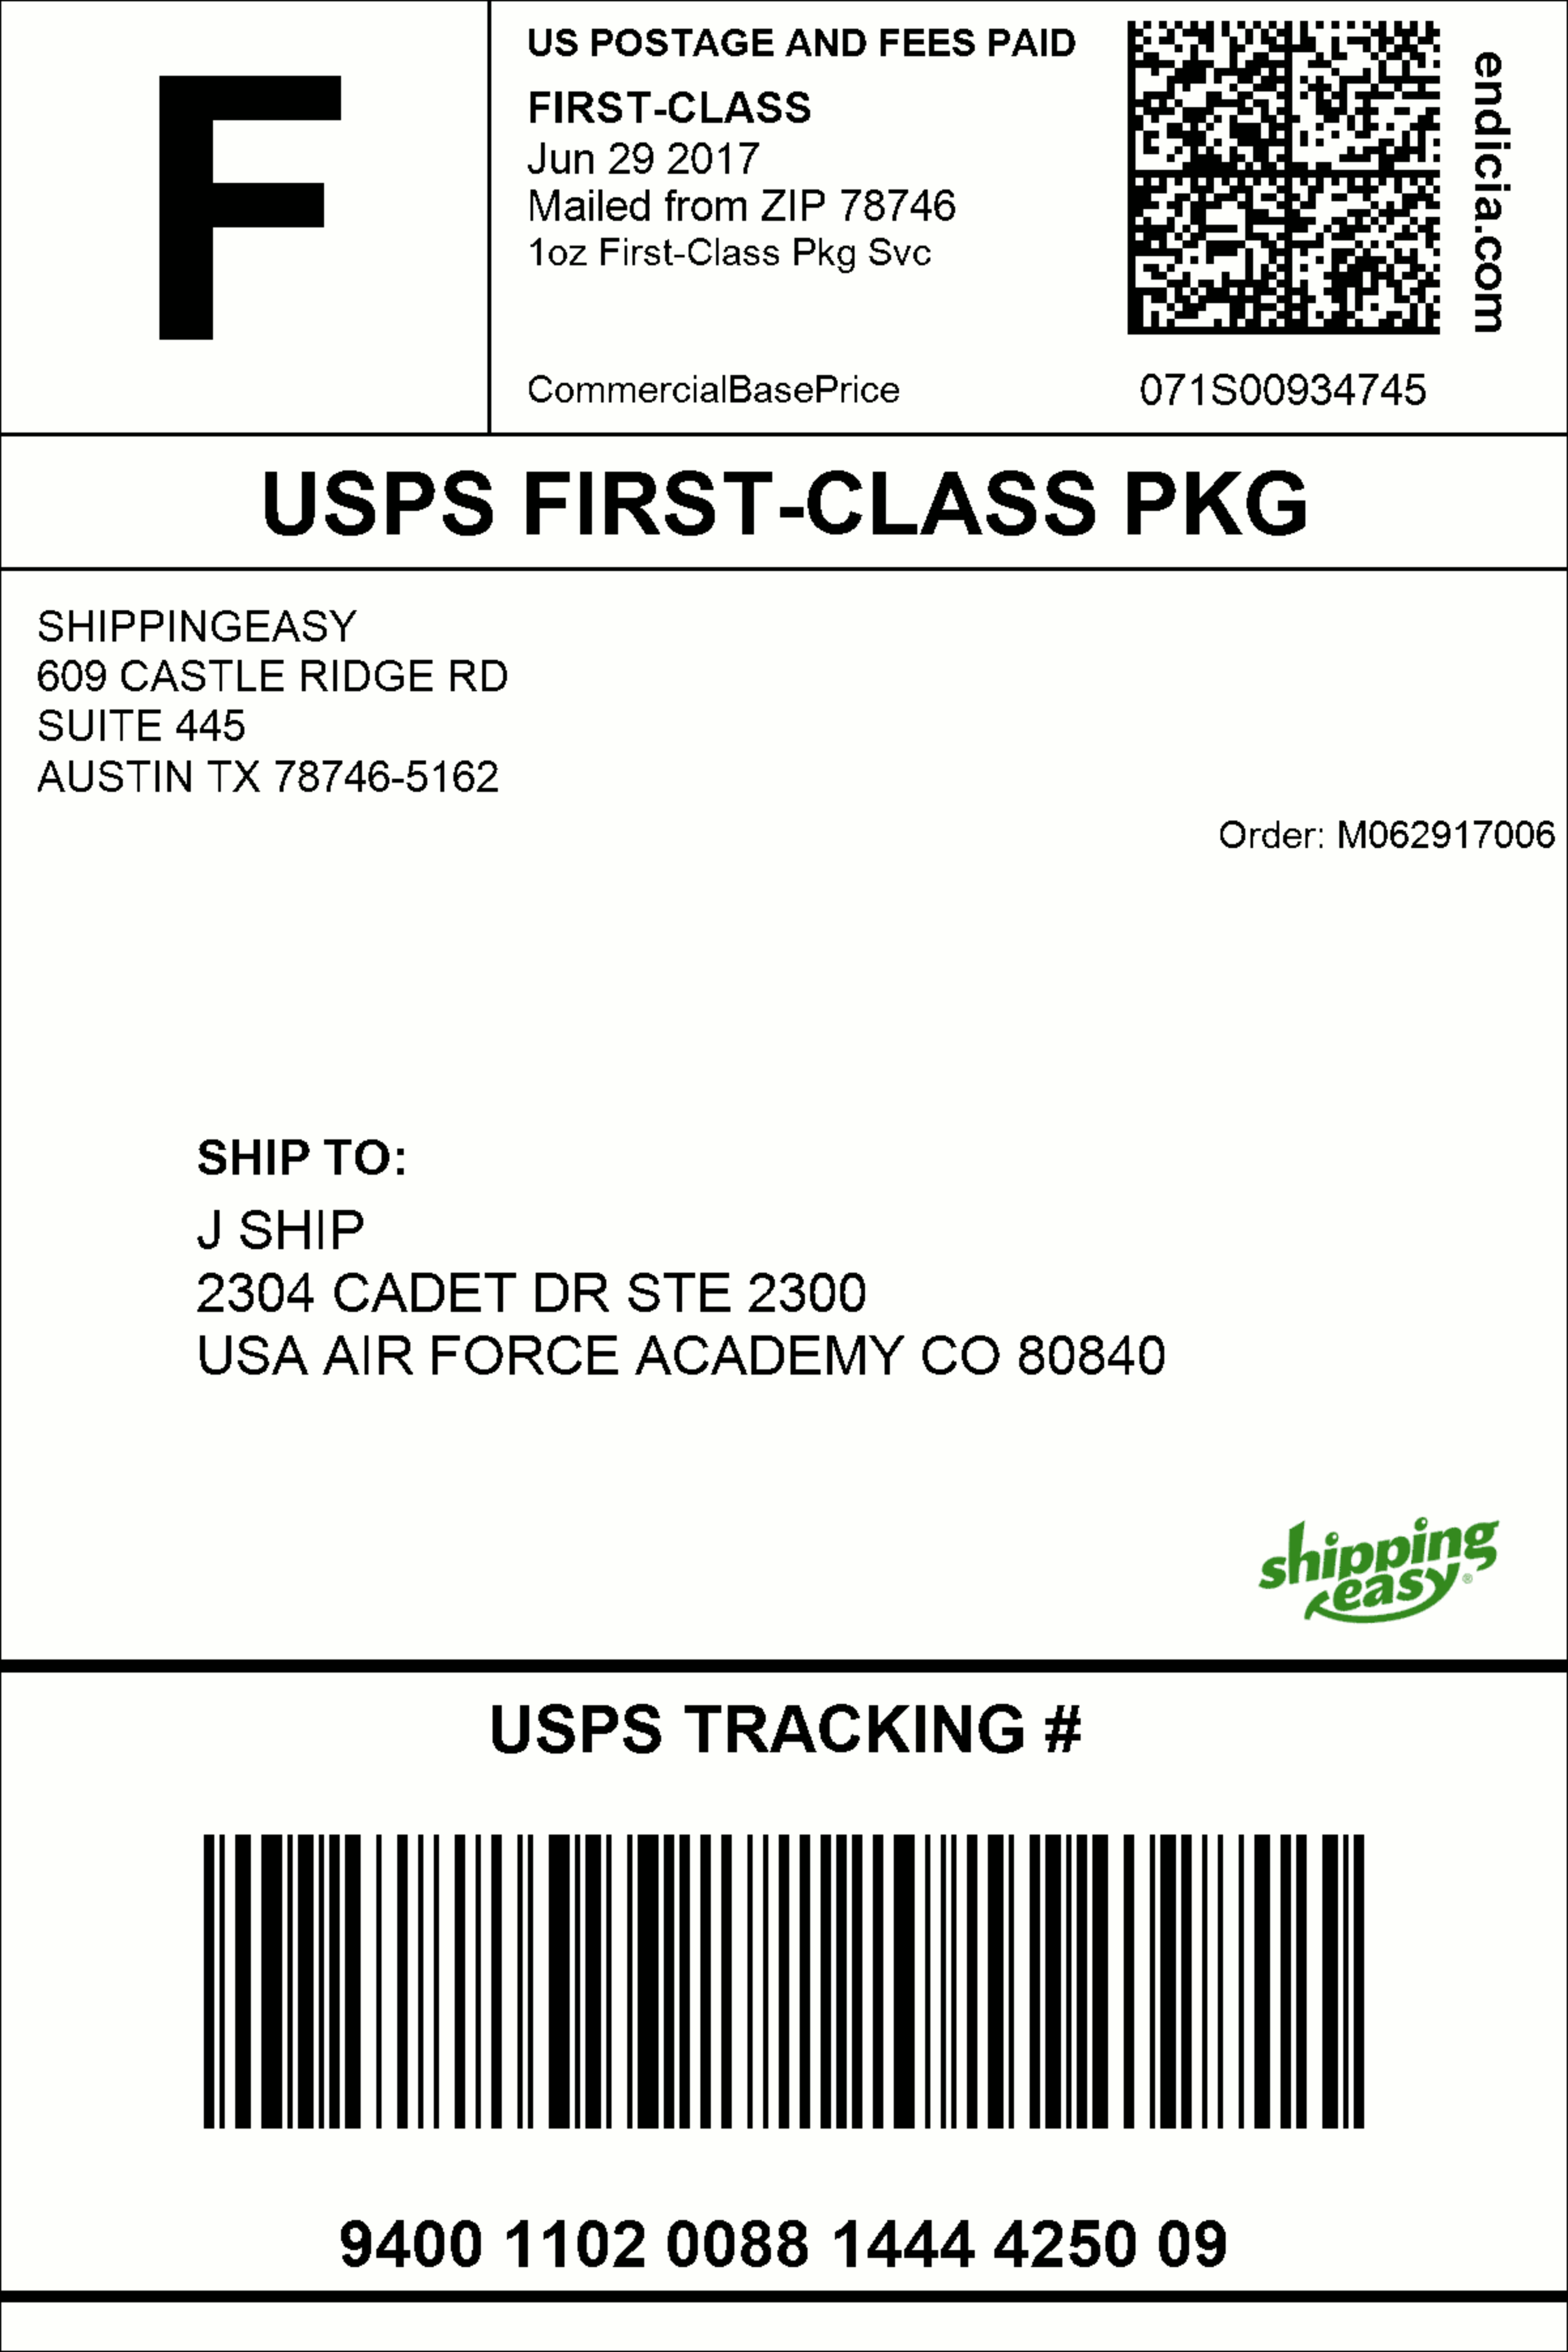 Postage Logo - How to: Add my logo to shipping labels – ShippingEasy Knowledge Base